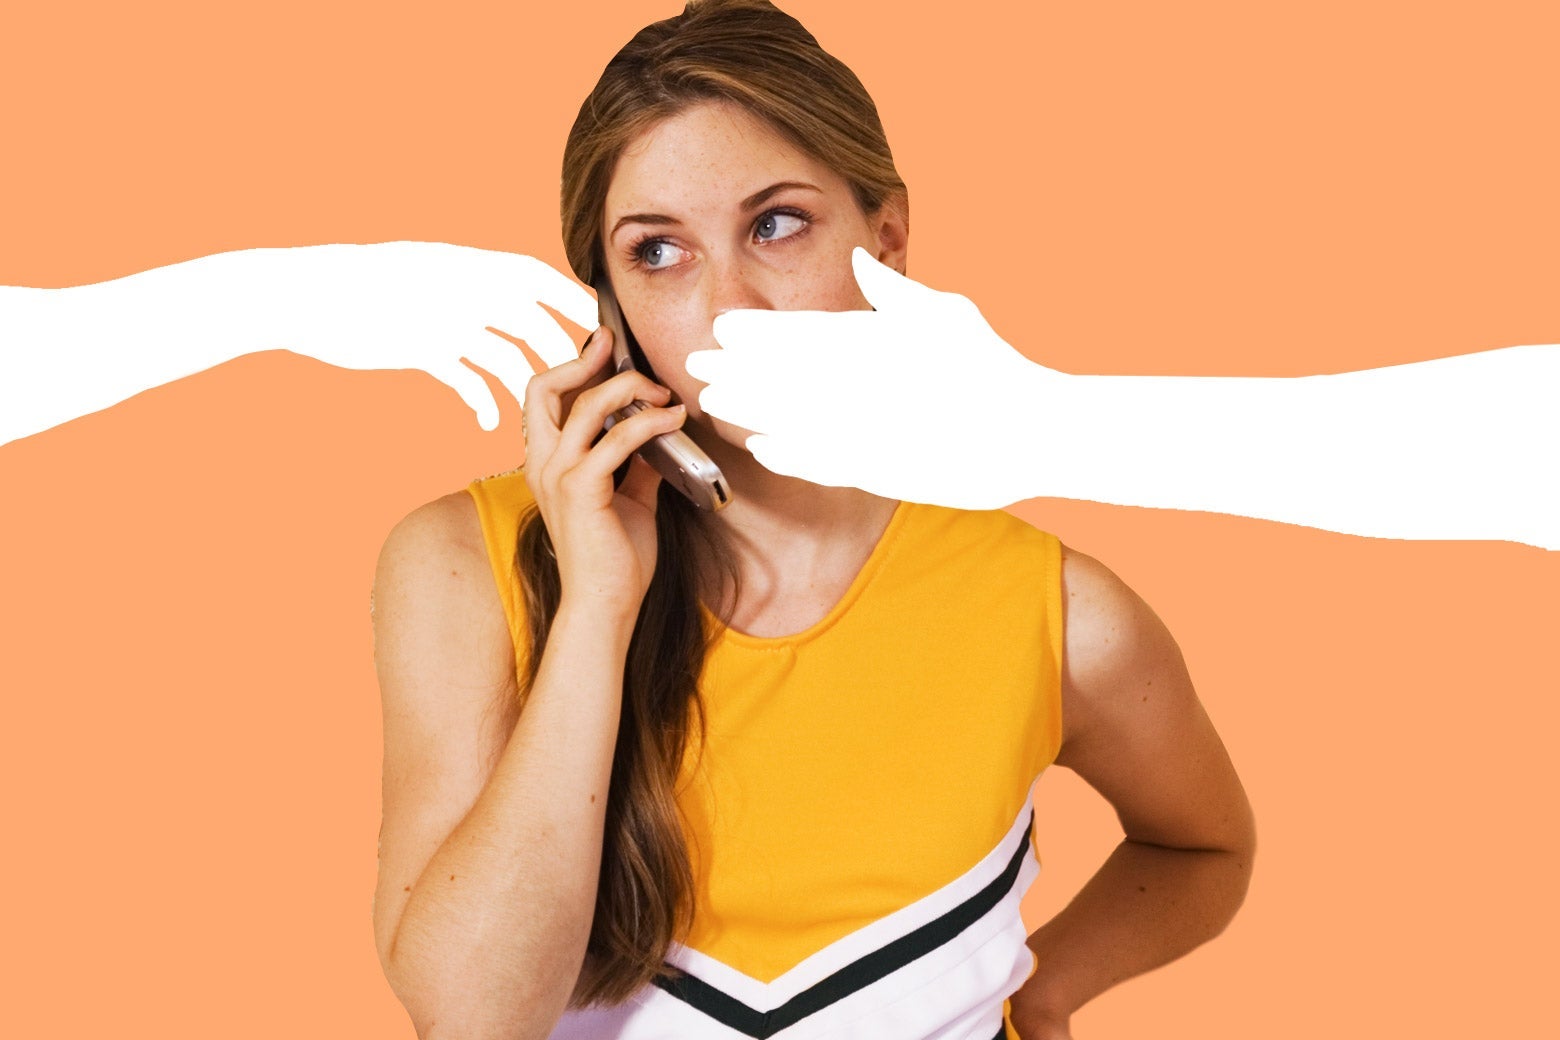 A cheerleader talks on the phone as a disembodied hand covers her mouth and other disembodied hand steals her phone.